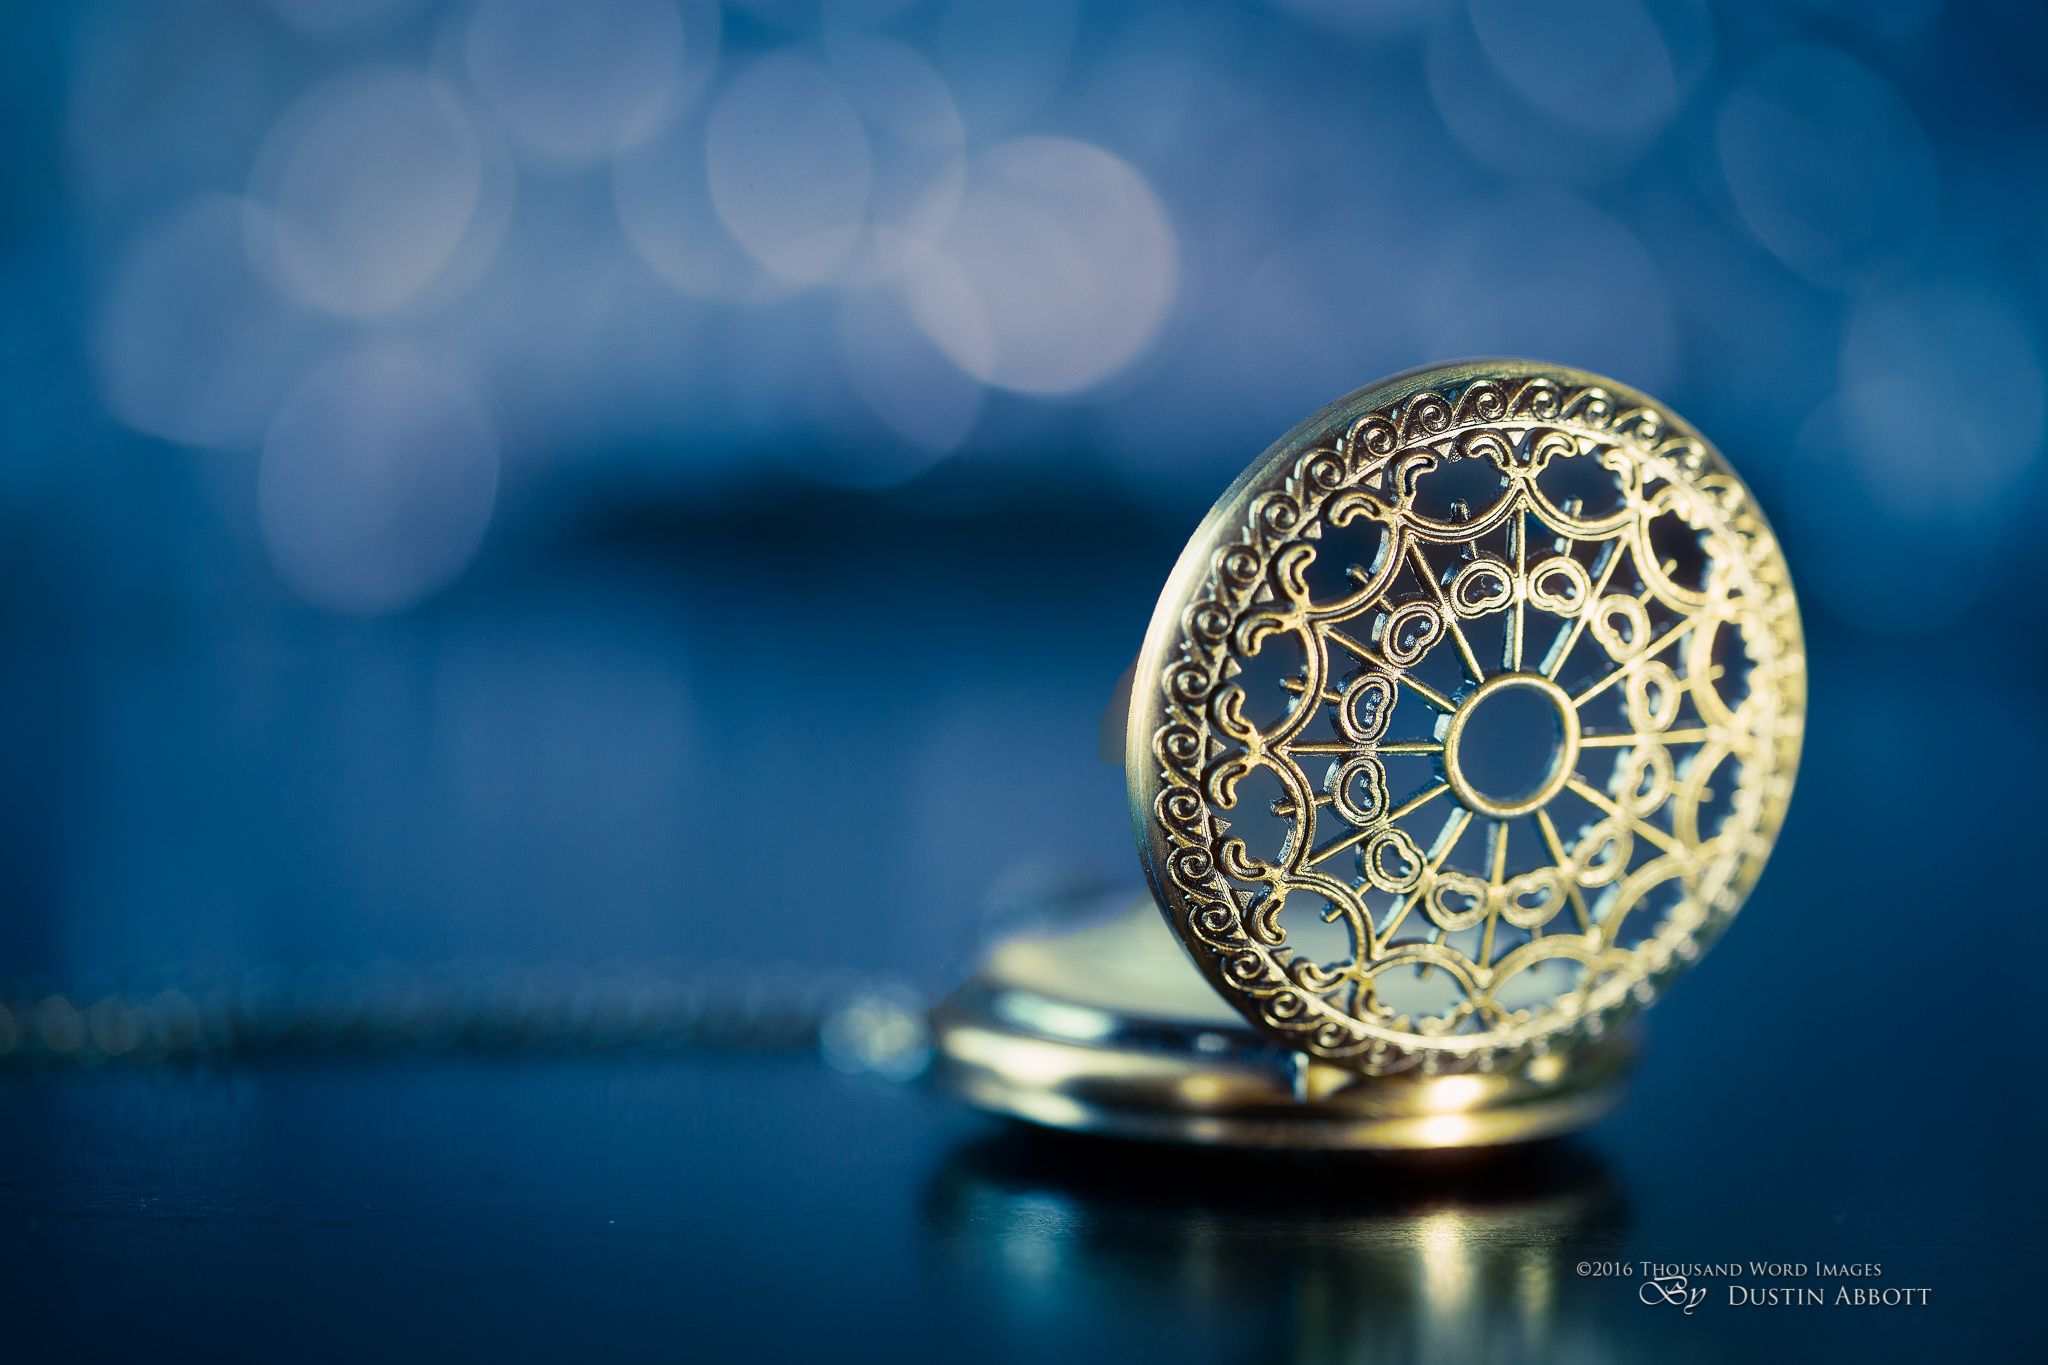 Spicing up the Bokeh